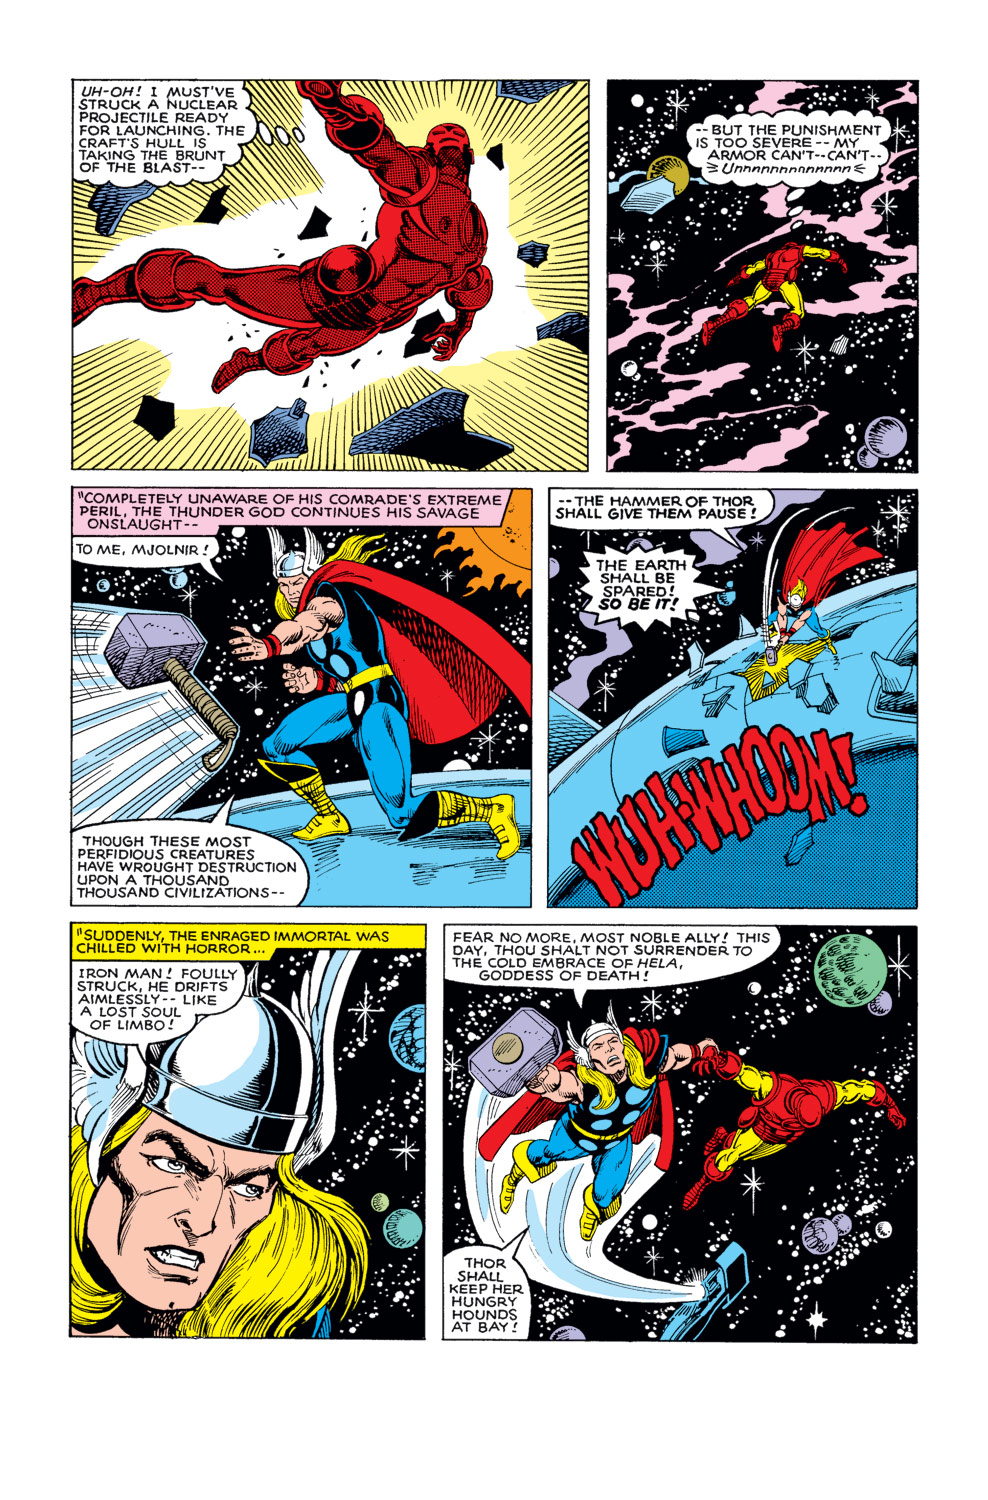 What If? (1977) issue 20 - The Avengers fought the Kree-Skrull war without Rick Jones - Page 21